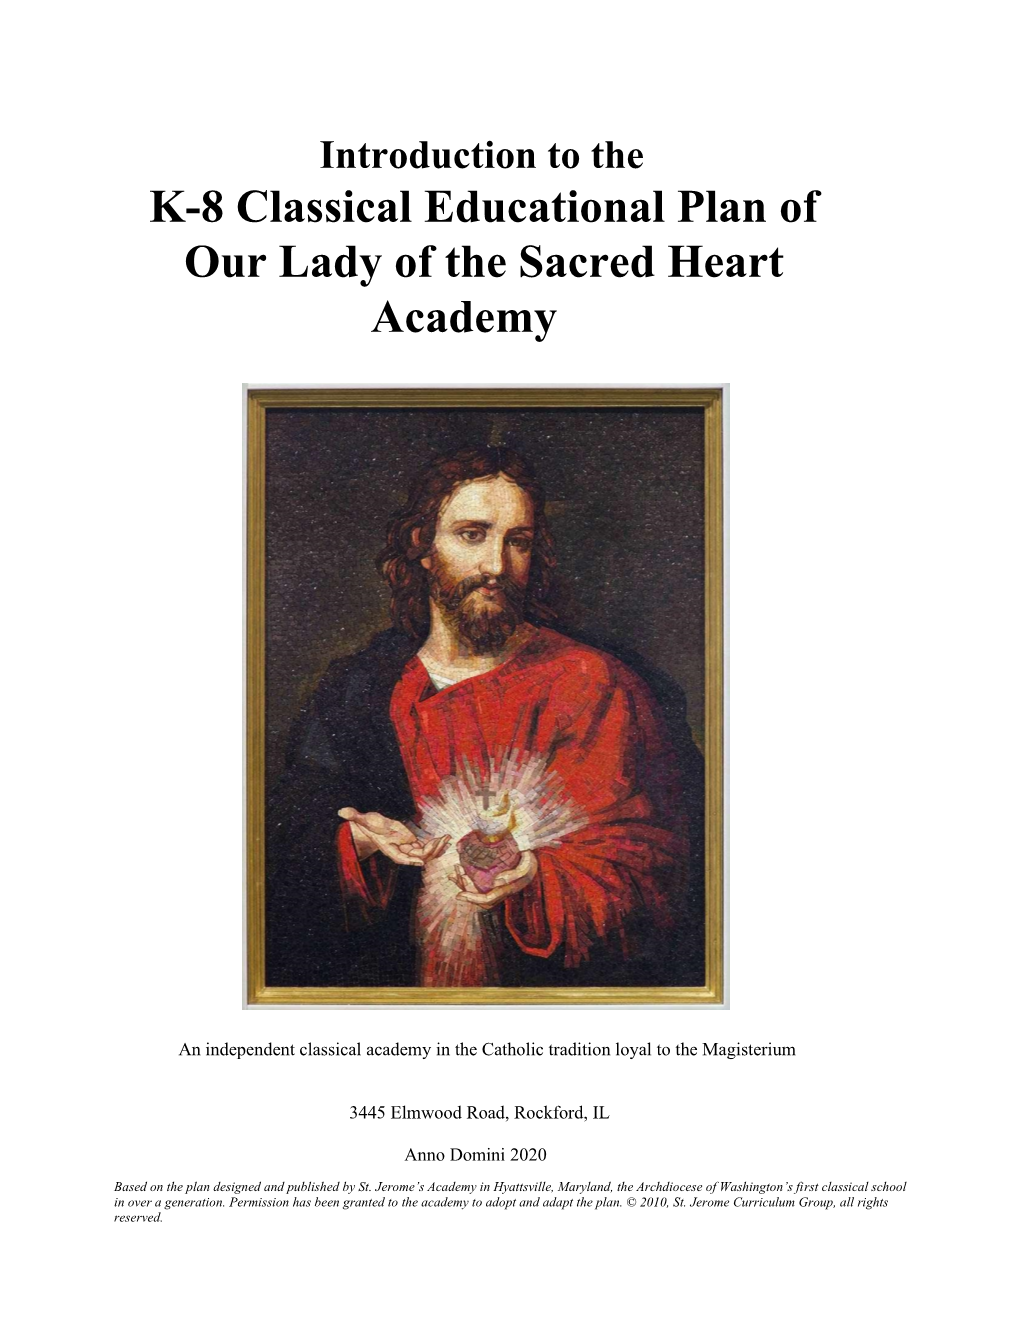 K-8 Classical Educational Plan of Our Lady of the Sacred Heart Academy